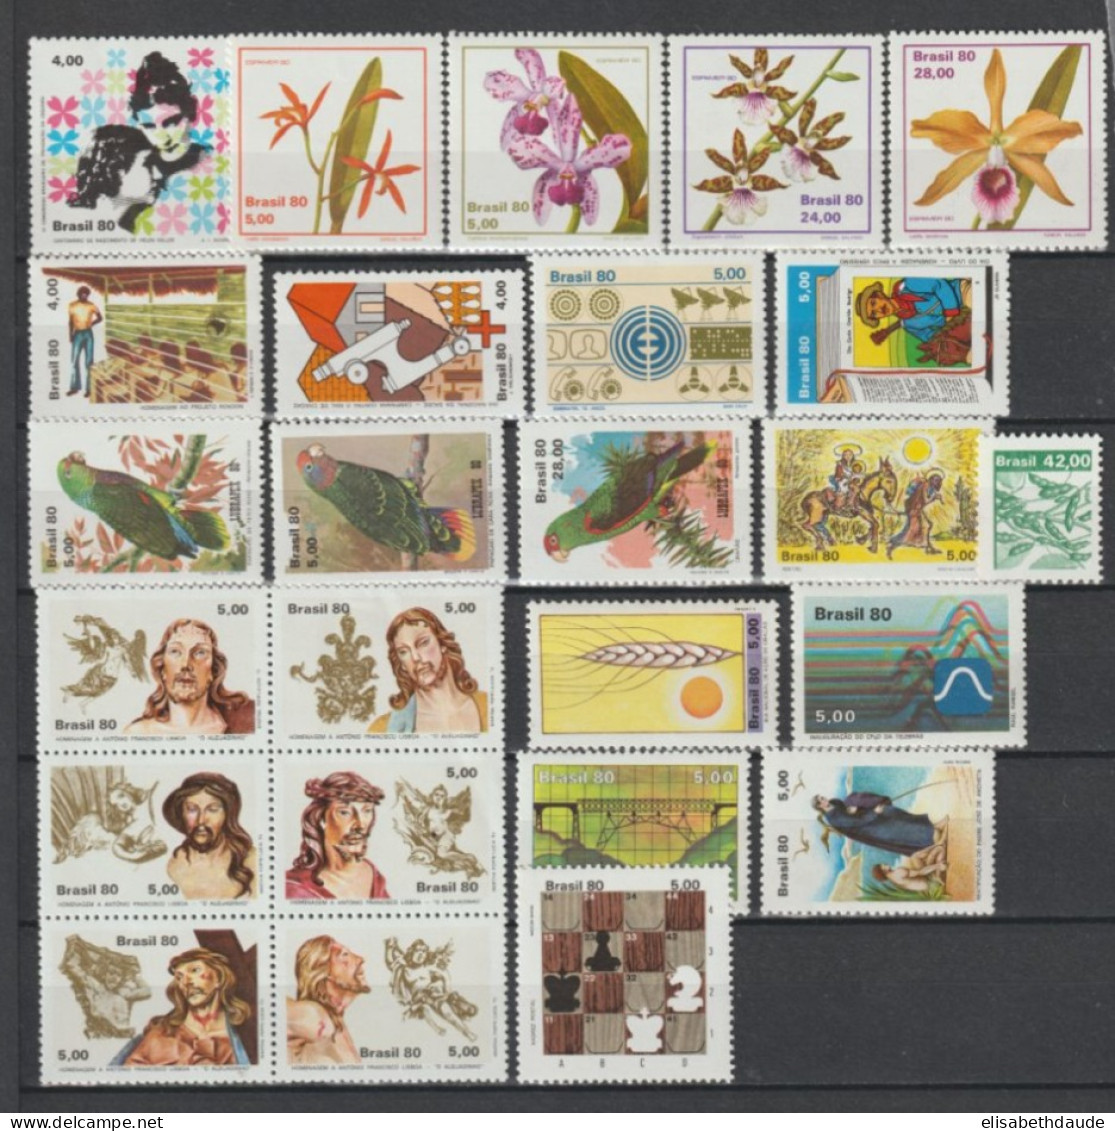 BRESIL - 1979/1980 - COLLECTION PRESQUE COMPLETE ! ** MNH - COTE YVERT = 118.2 EUR. - 3 PAGES - Collections, Lots & Series